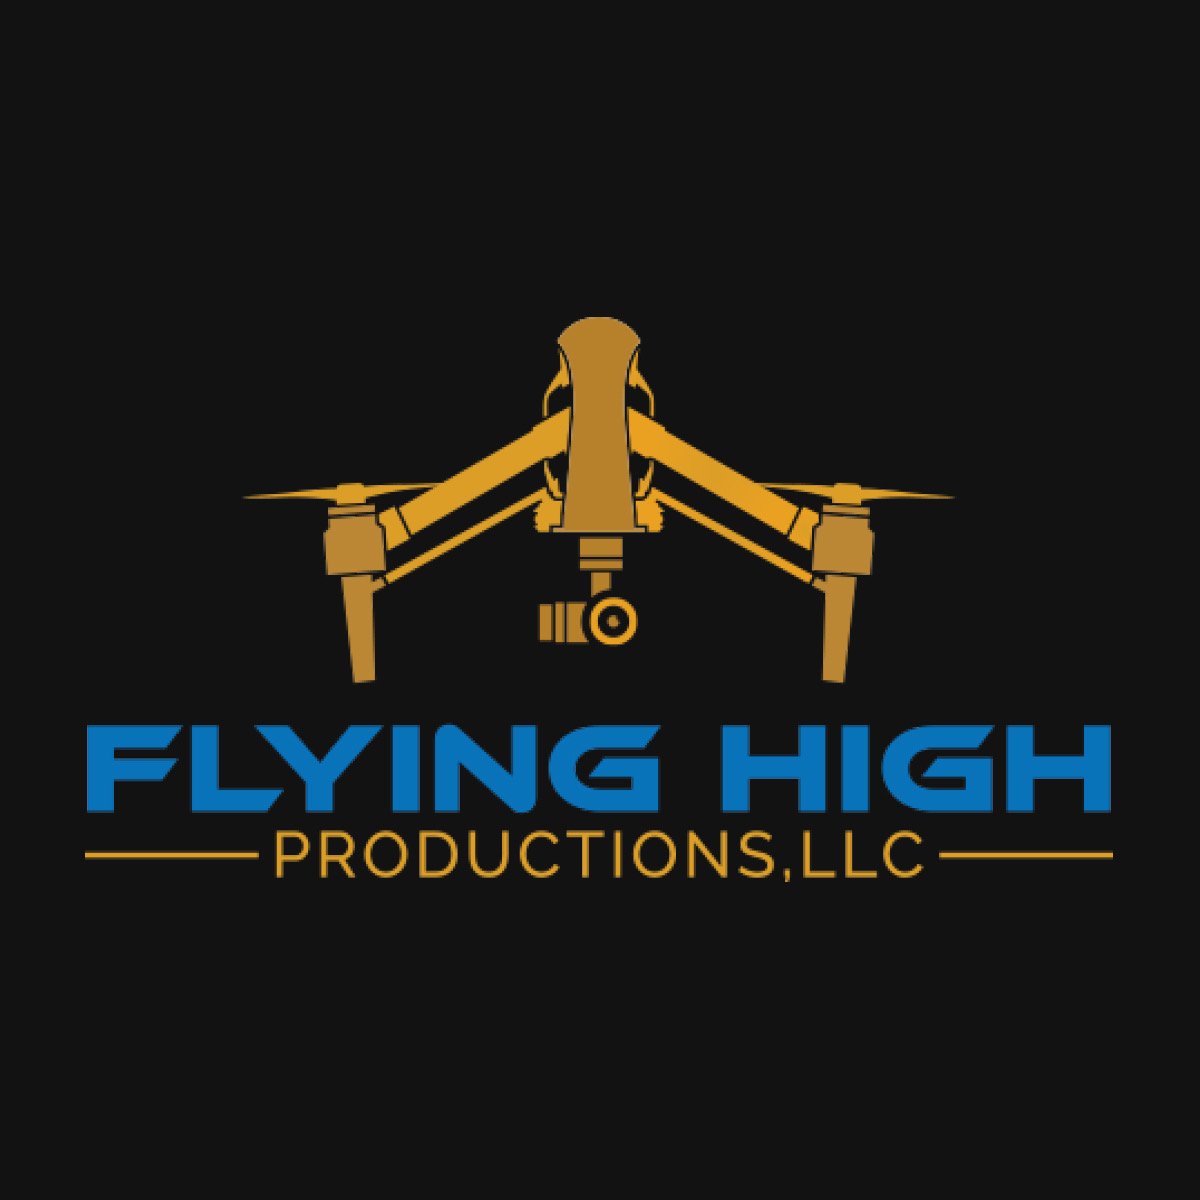 Flying High Productions